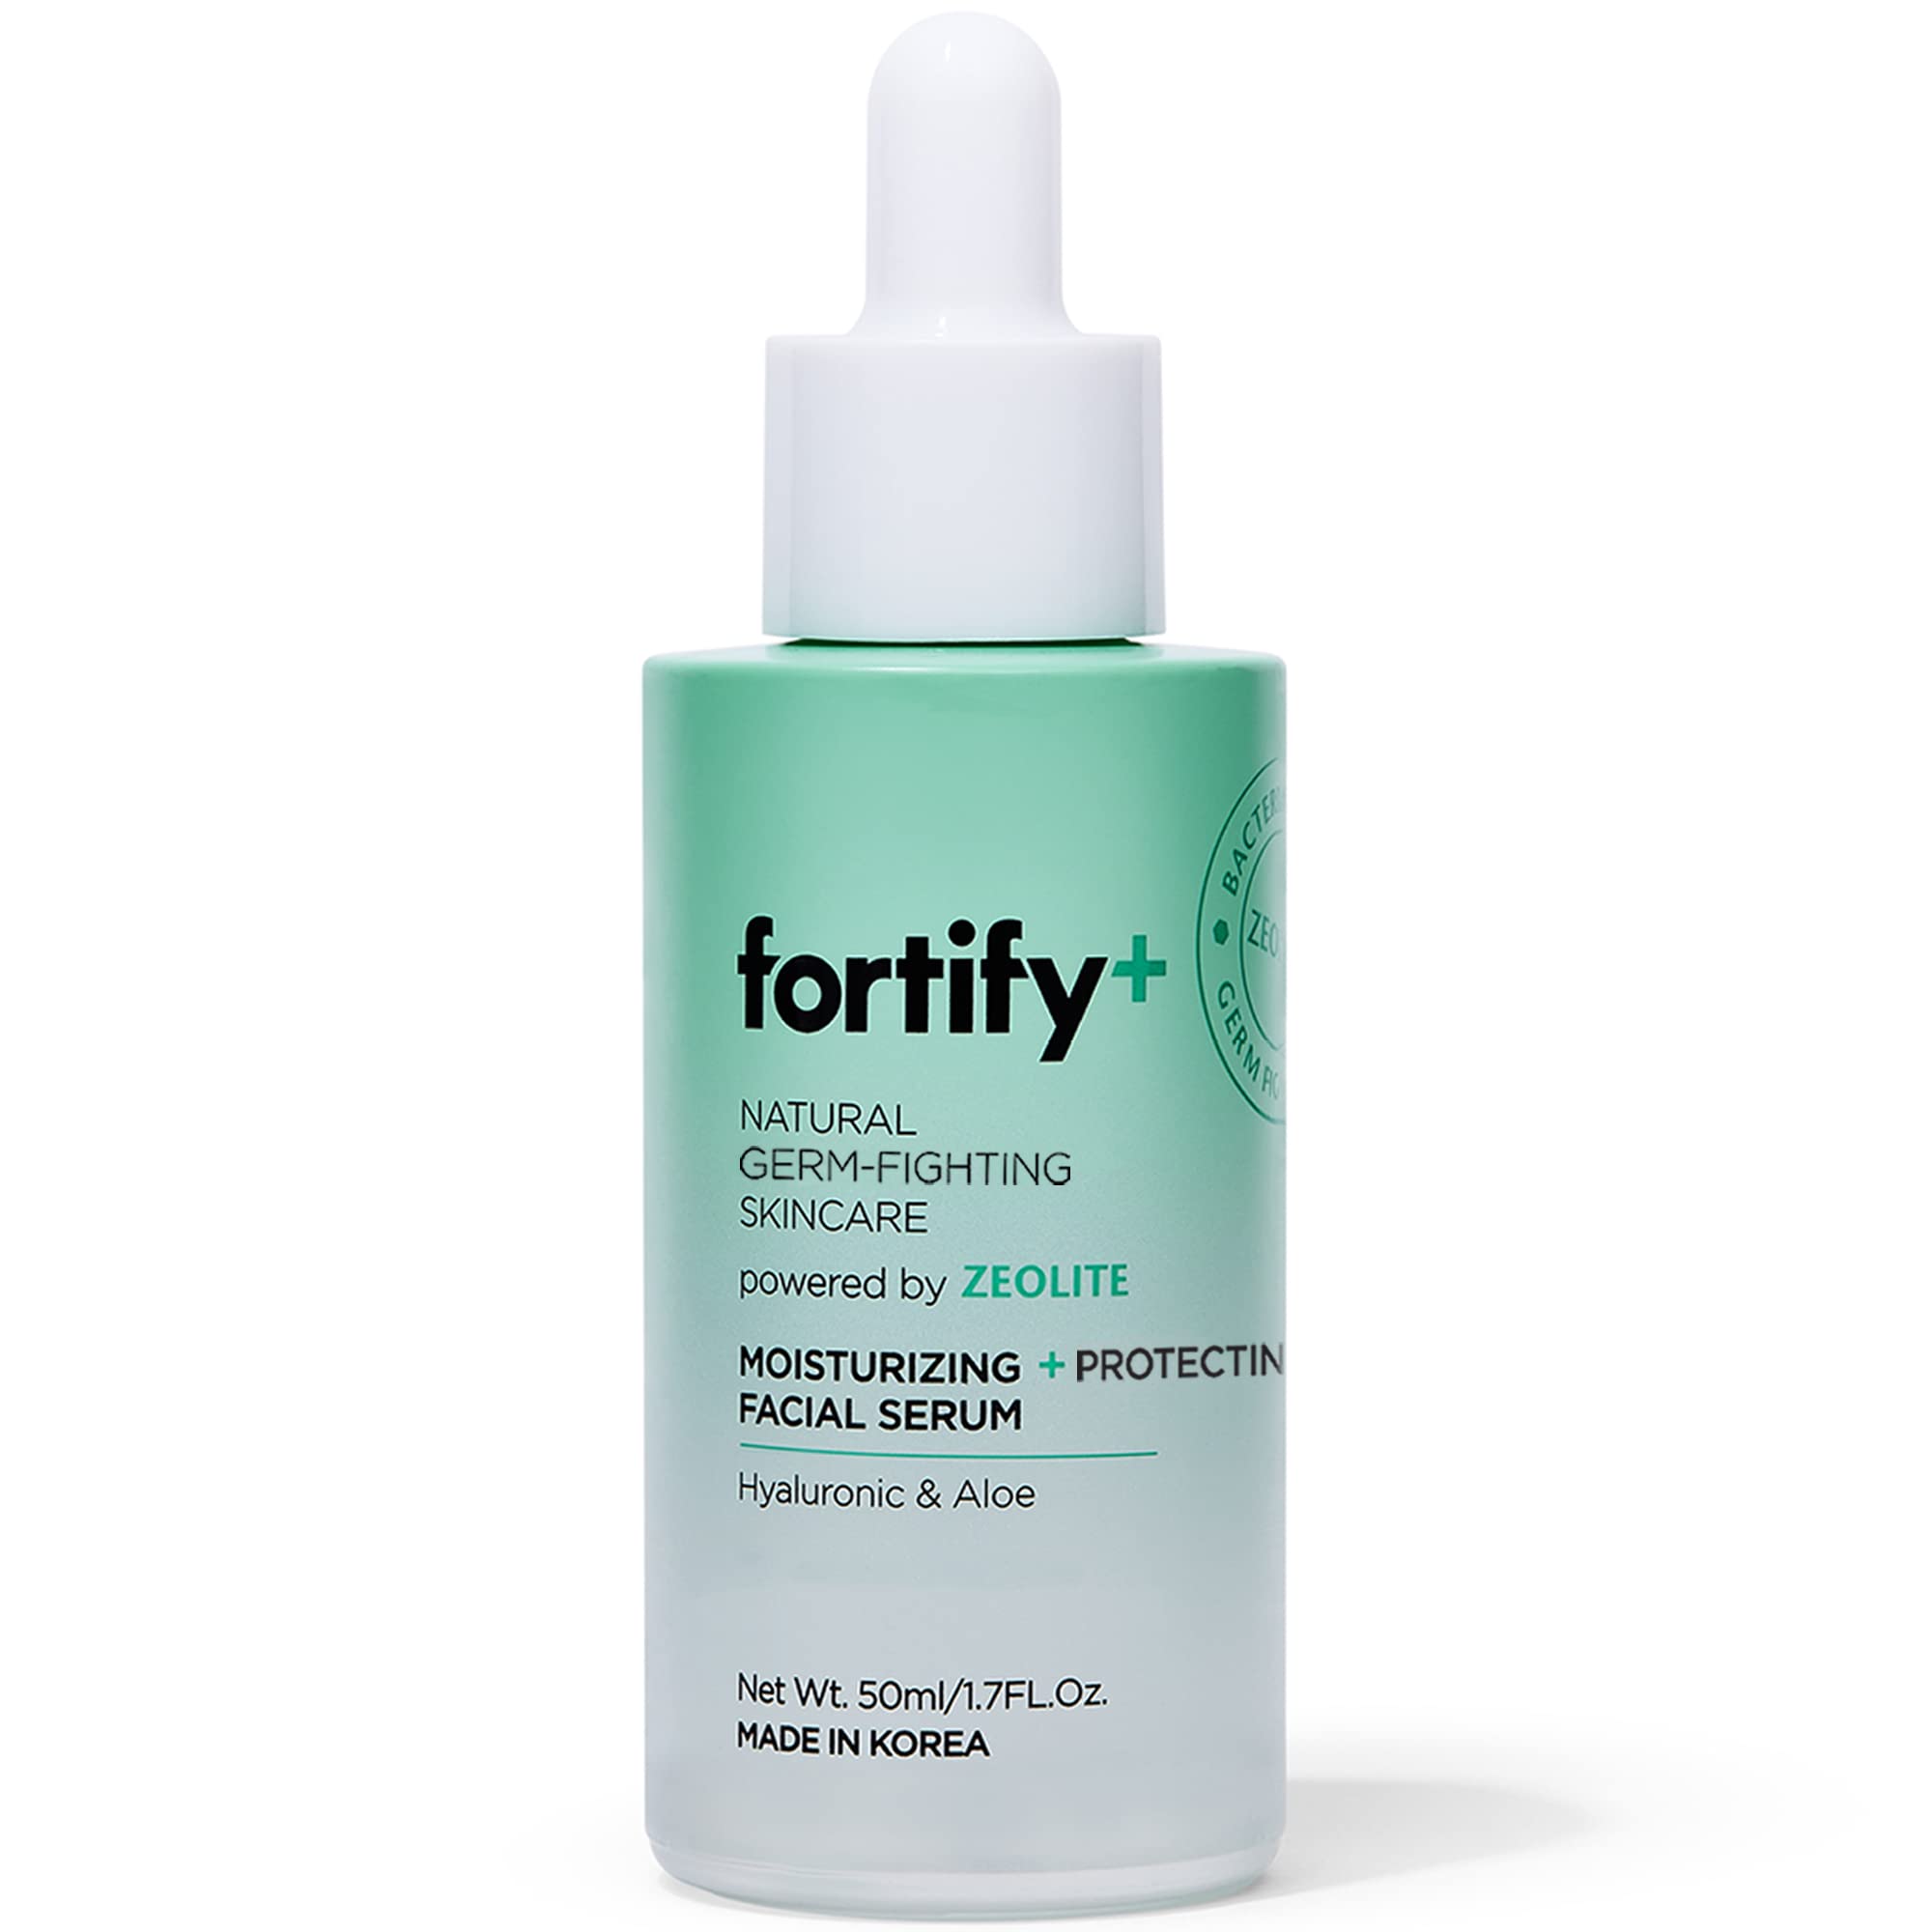 Fortify Value Set - Natural Germ-Fighting Skincare - De-Puffing Eye Cream, Protecting Facial Mist, Purifying Cleanser, Moisturizing Serum, and Nourishing Moisturizer